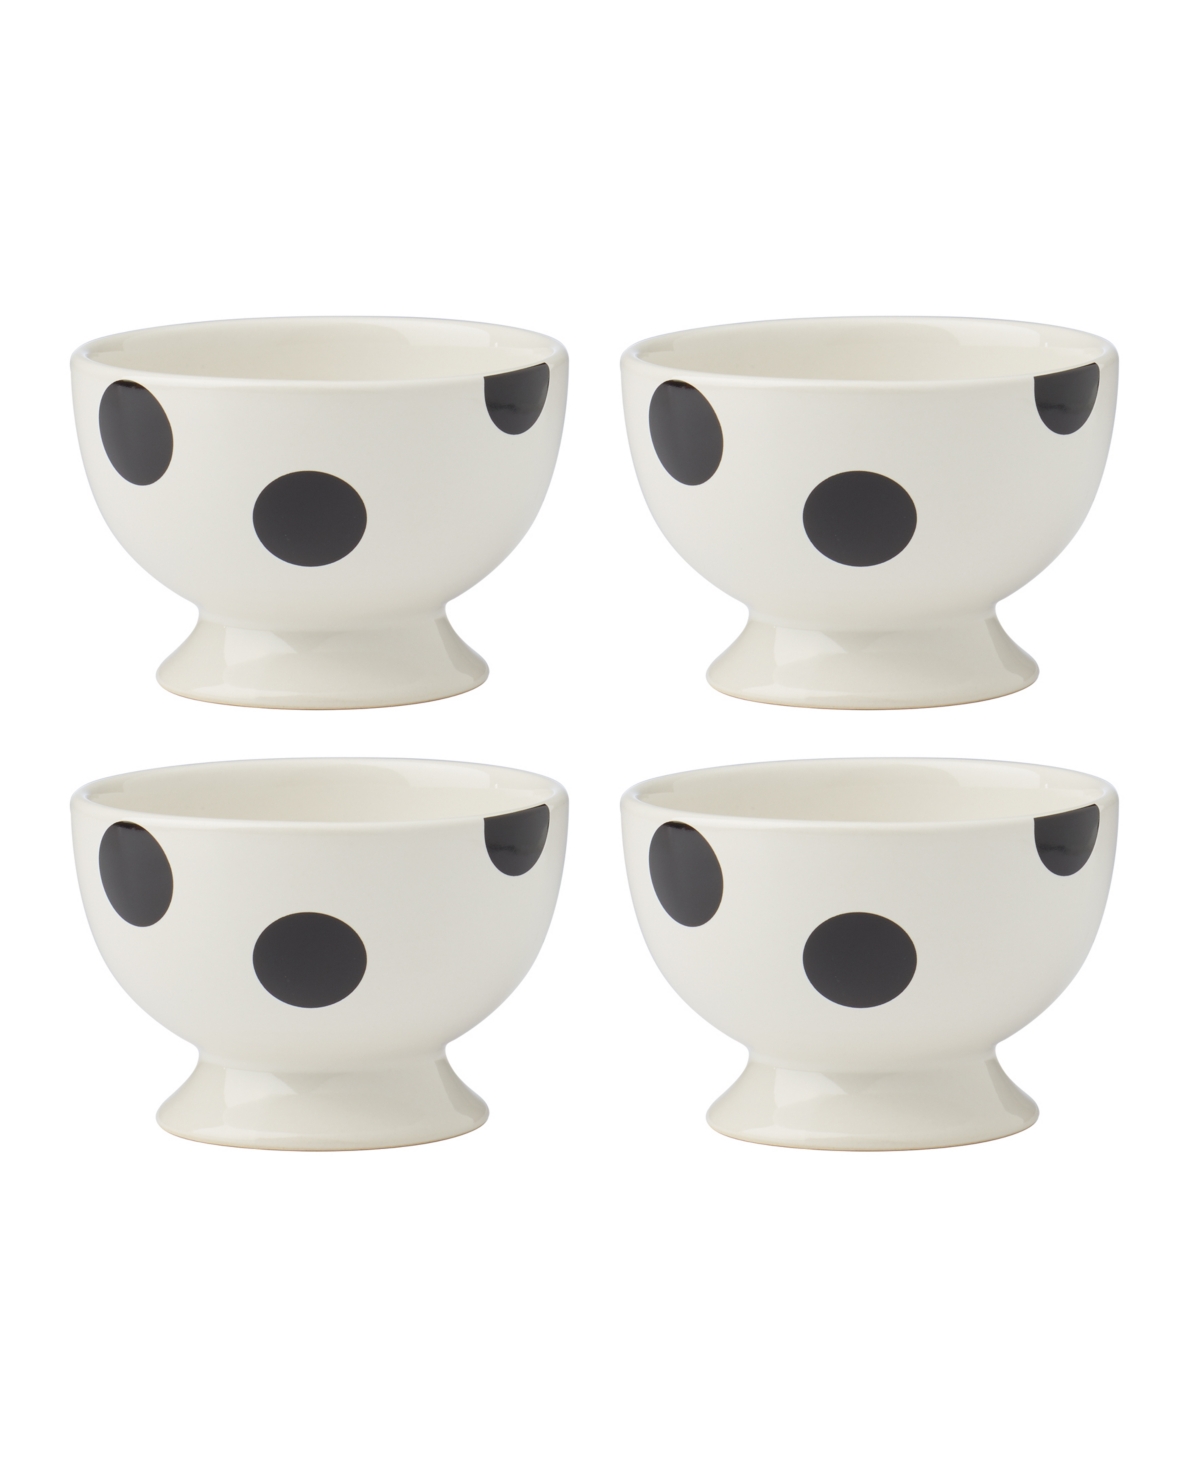 on the Dot Assorted Footed Dessert Bowls 4 Piece Set, Service for 4 - White